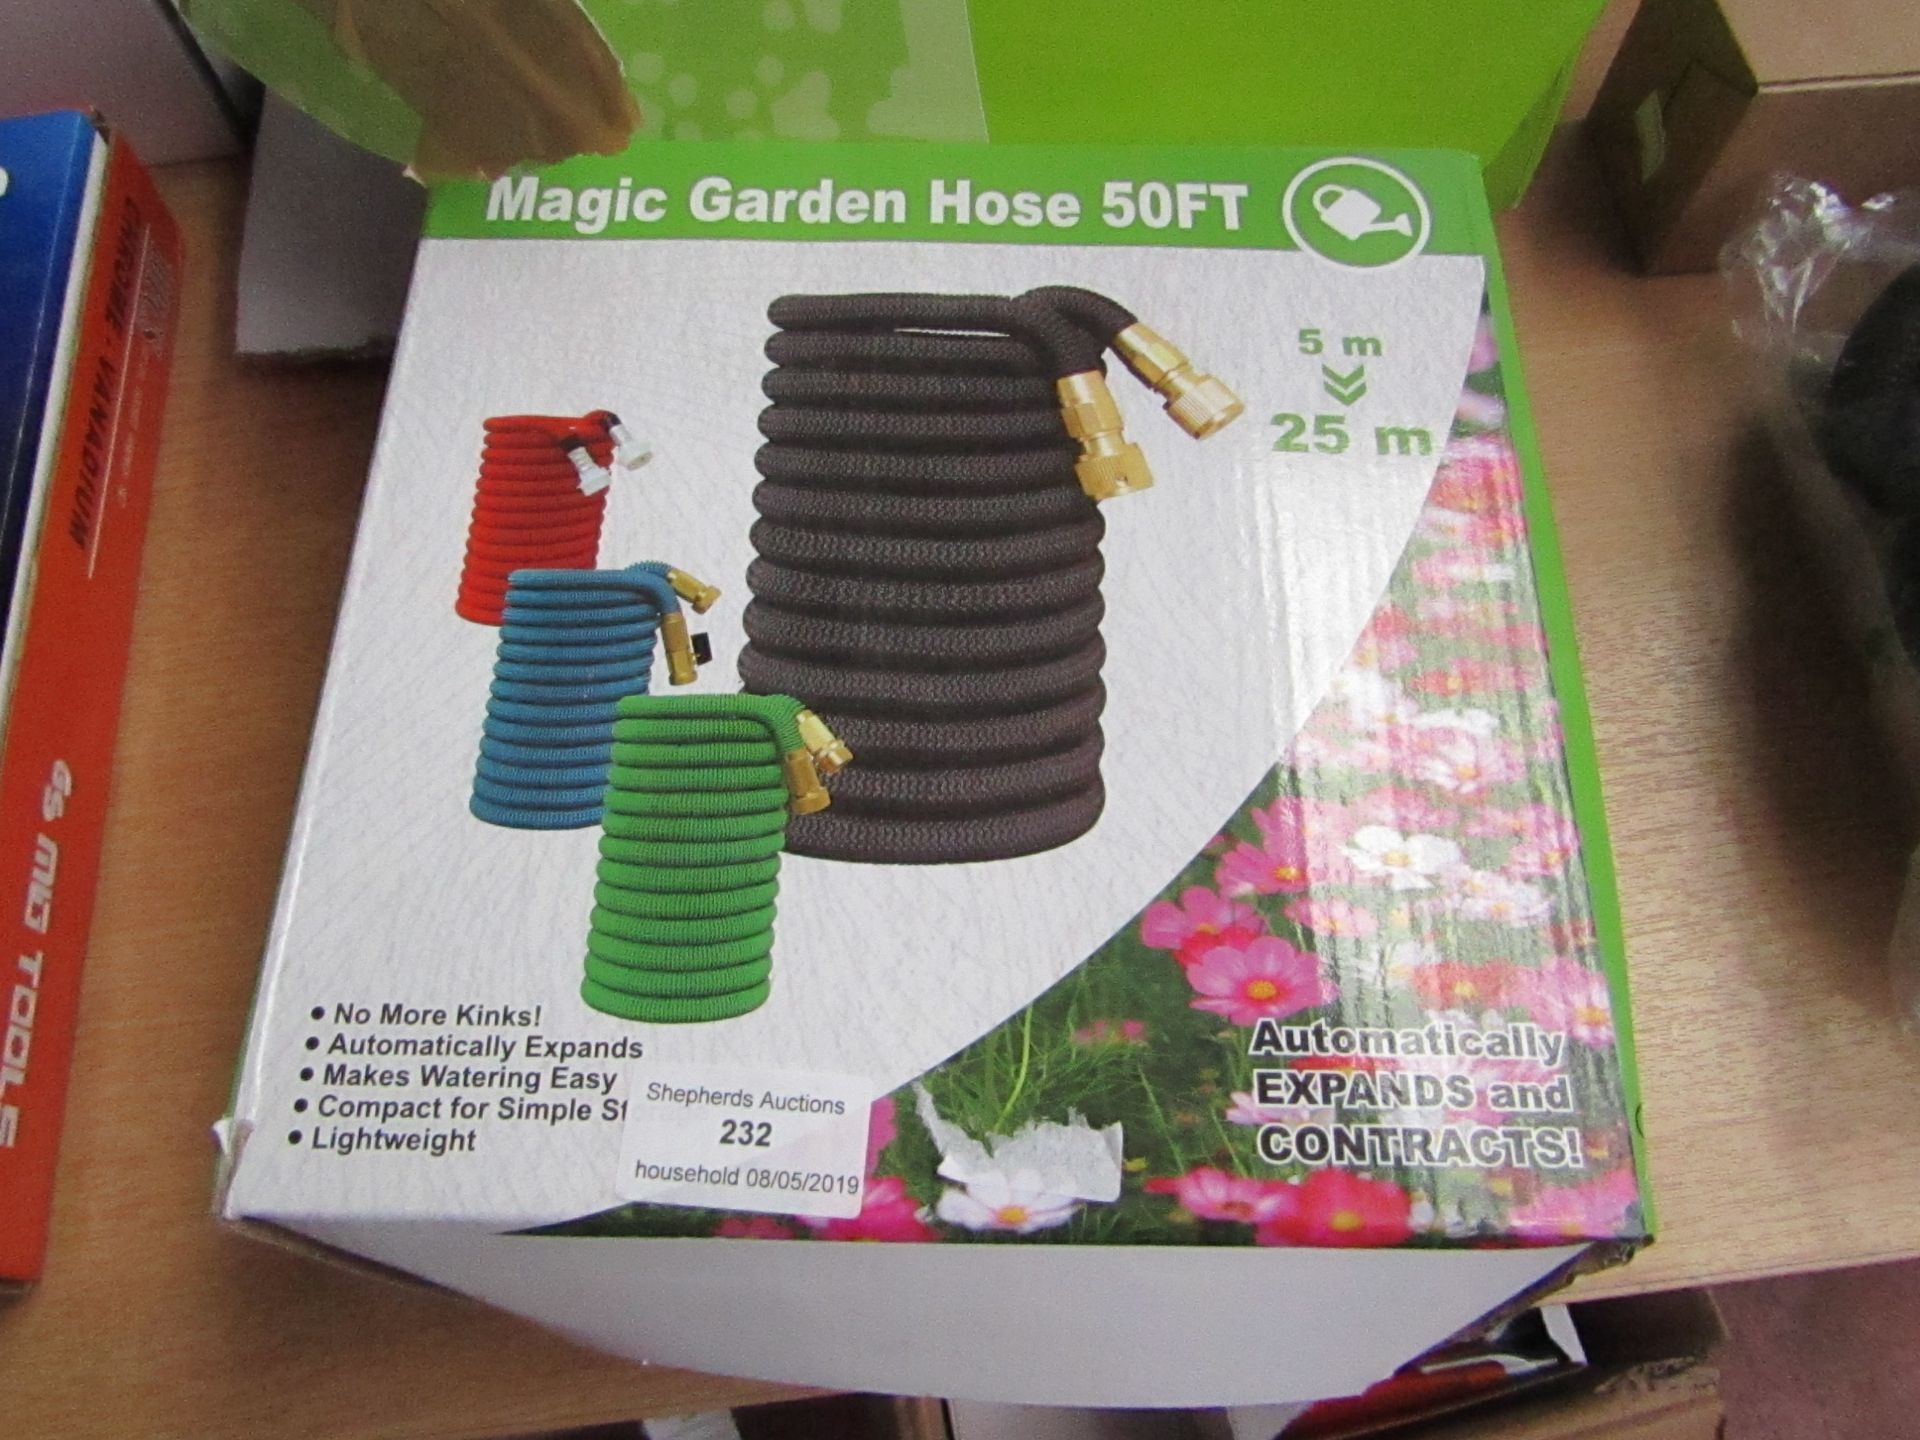 Magic garden hose 50ft, new and boxed.